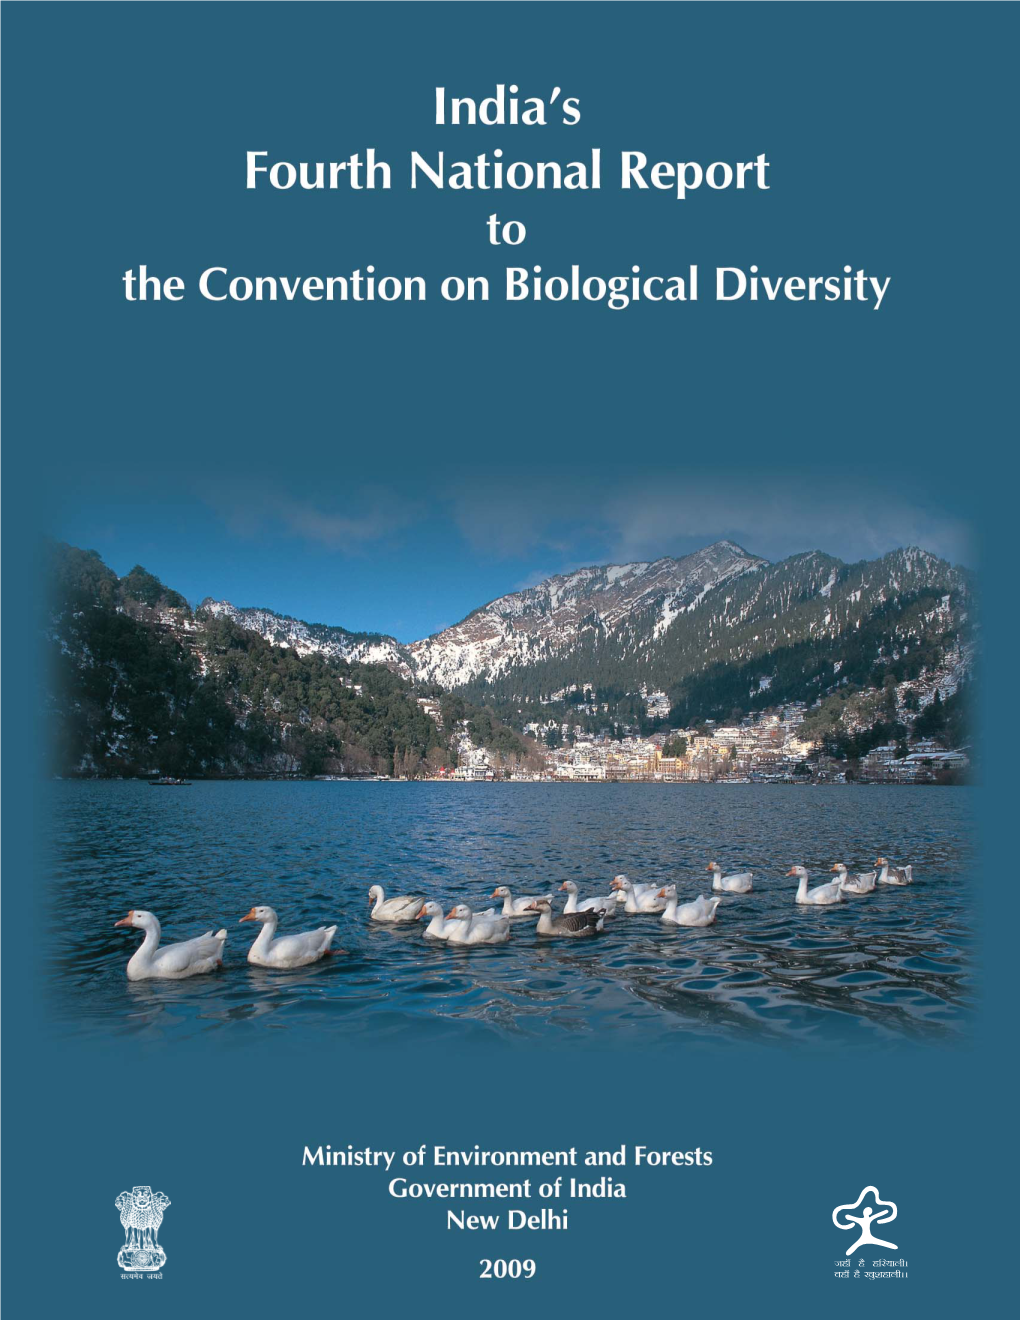 To the Convention on Biological Diversity